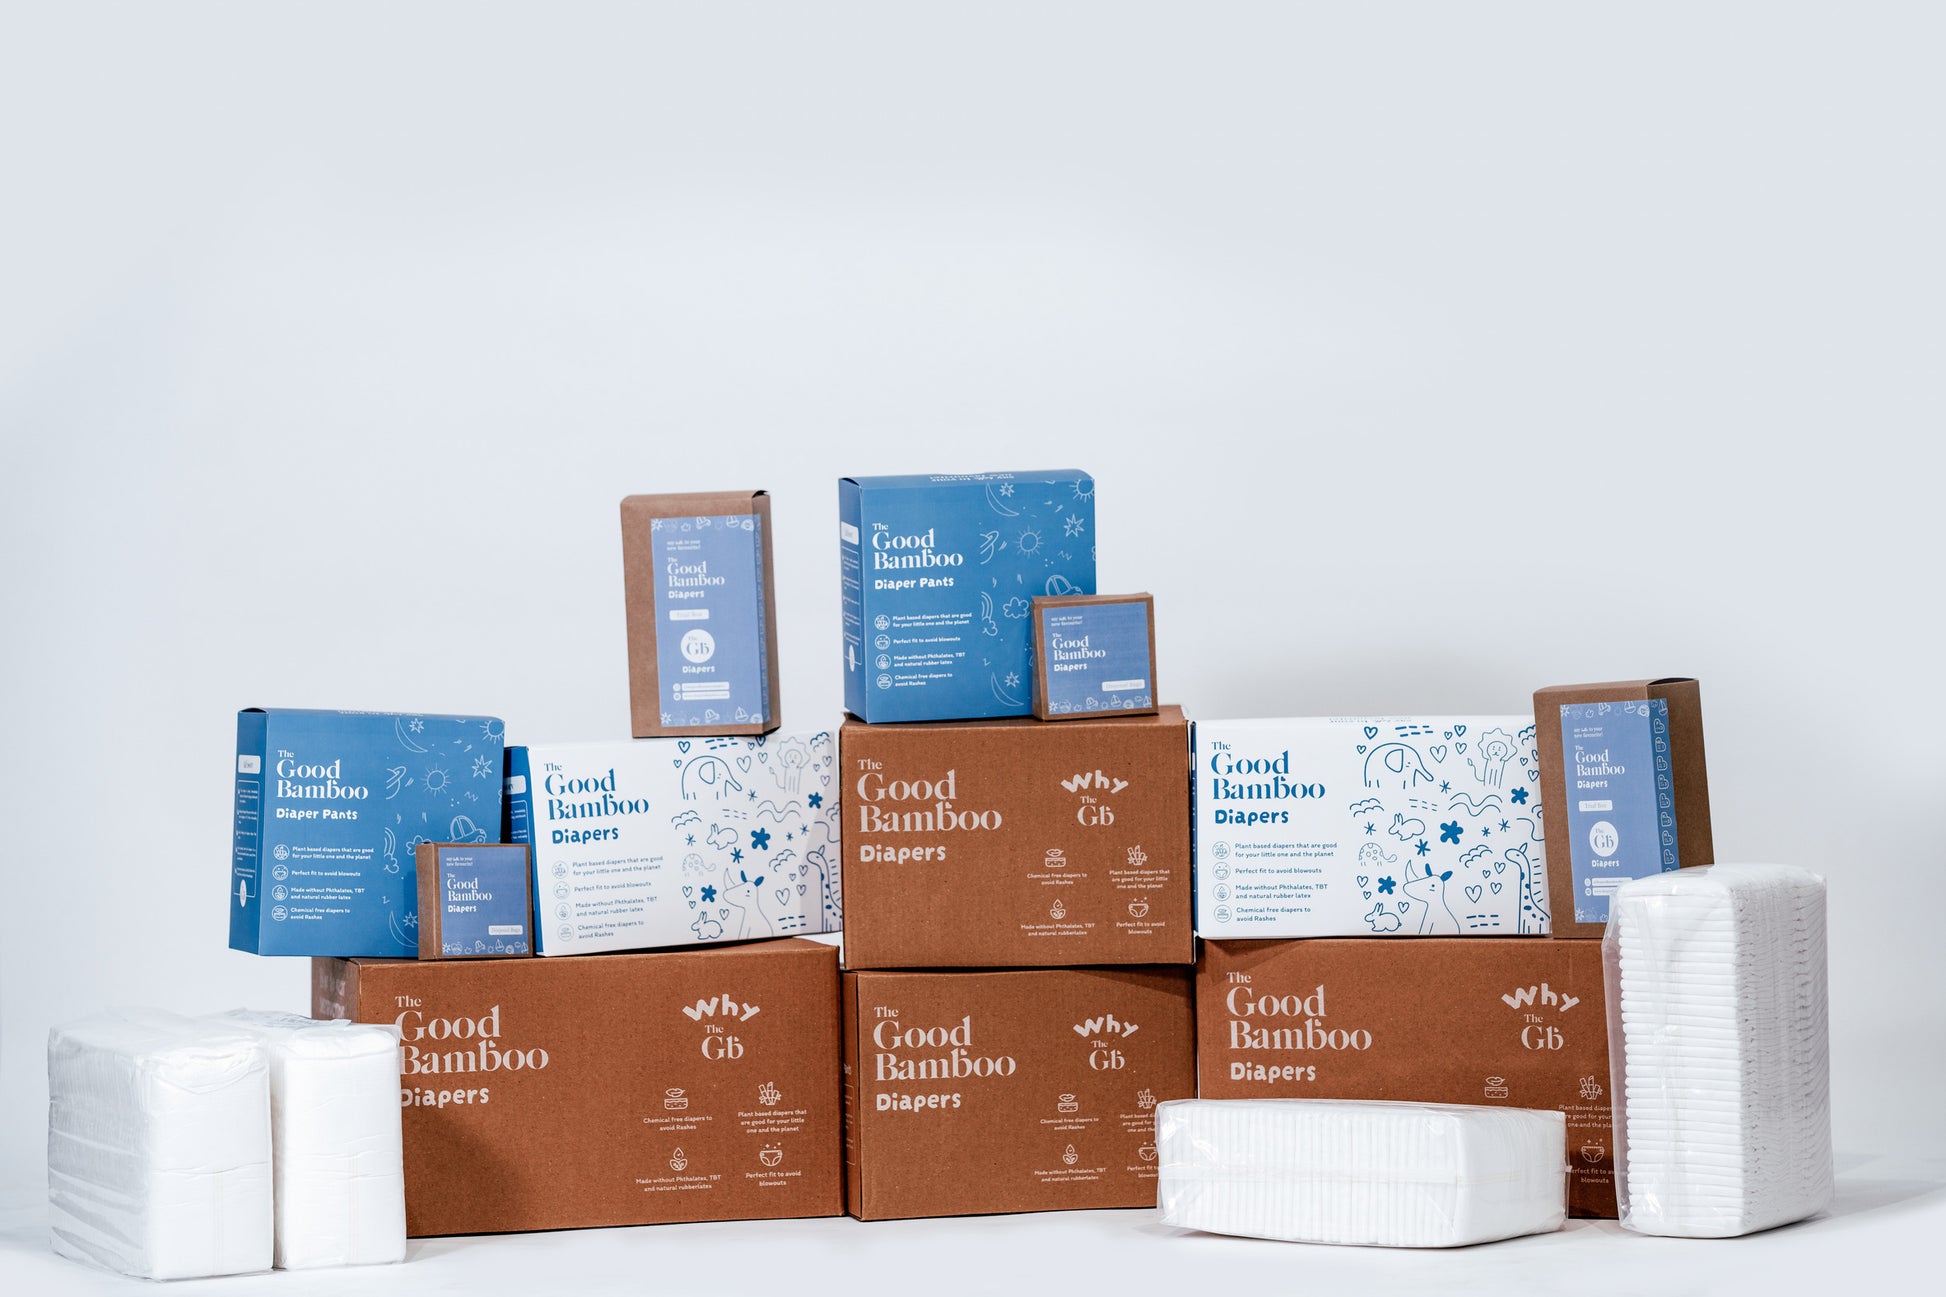 The Good Bamboo Trial Pack - Bamboo Diapers – Good Bamboo Diapers